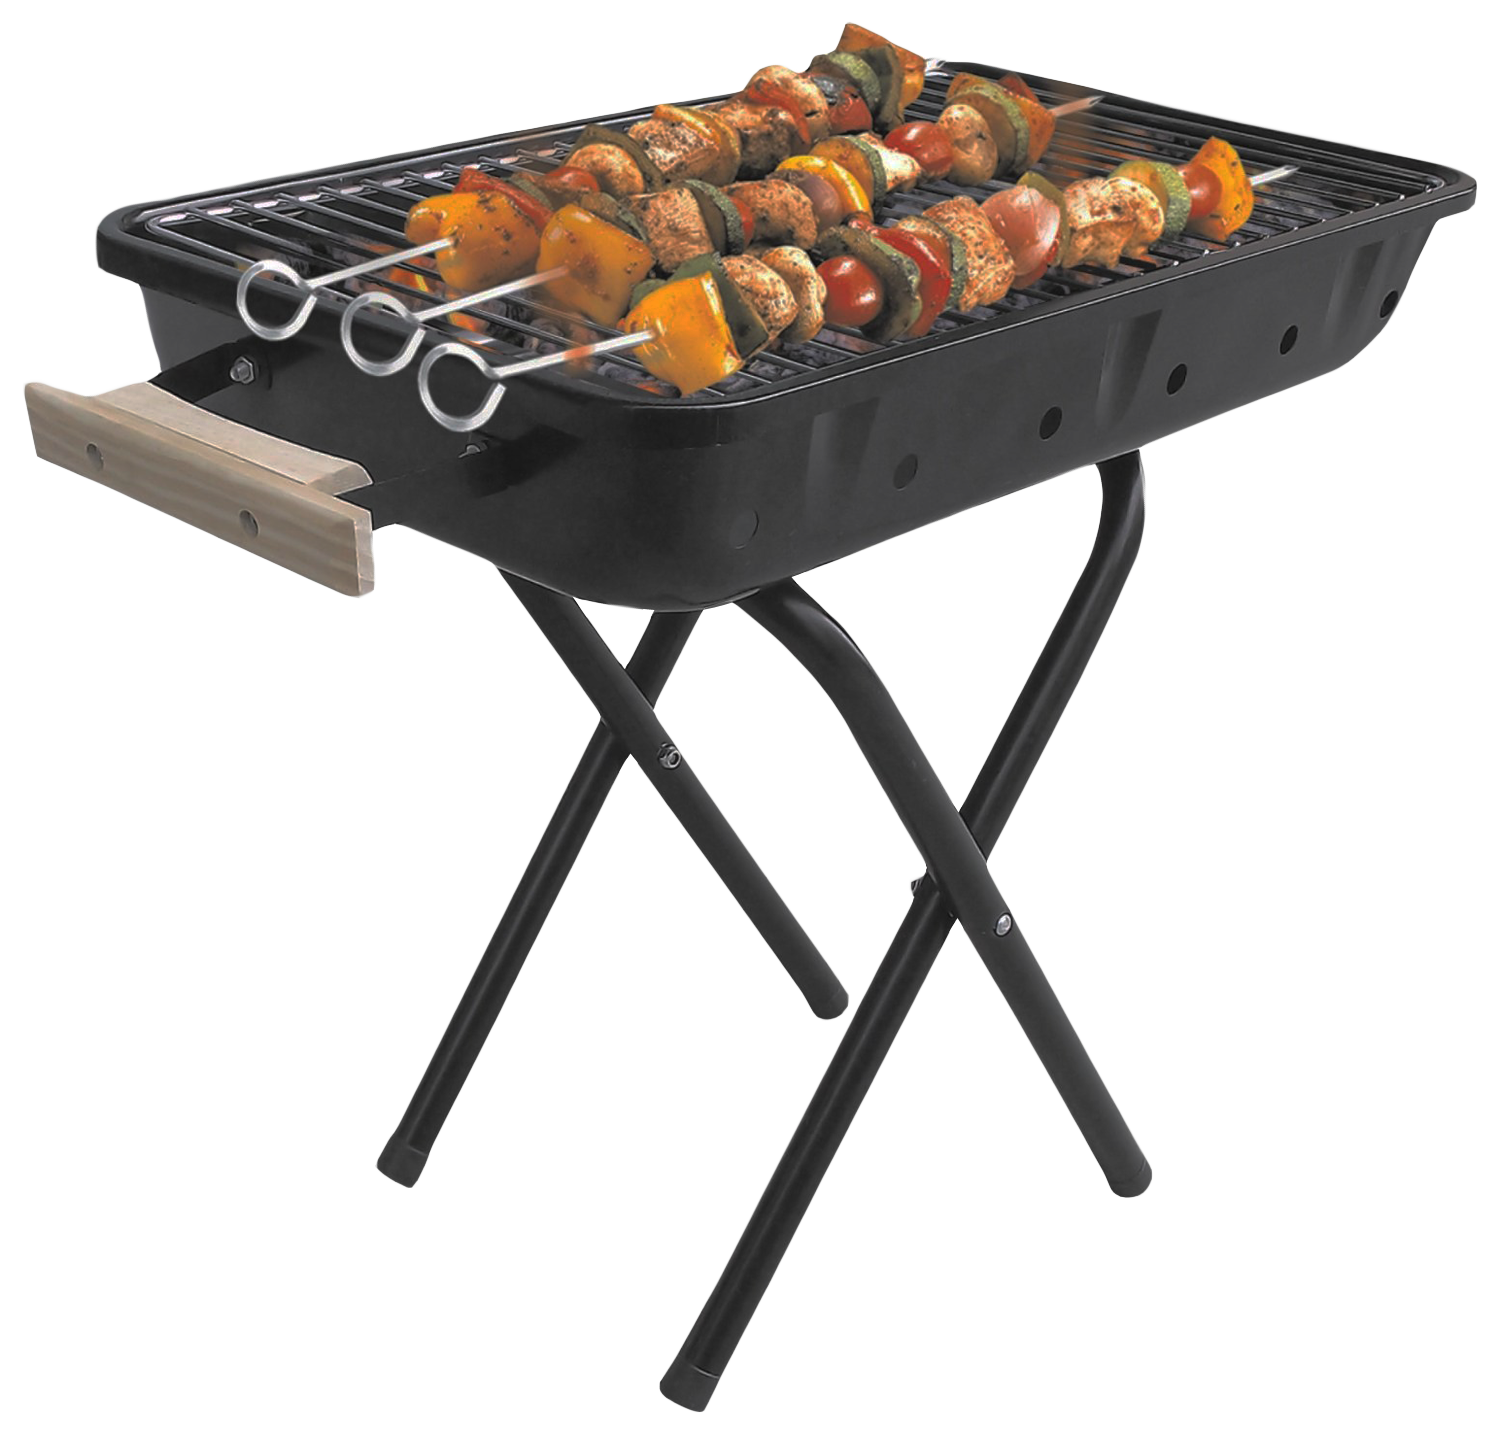 Grill Photos PNG Image